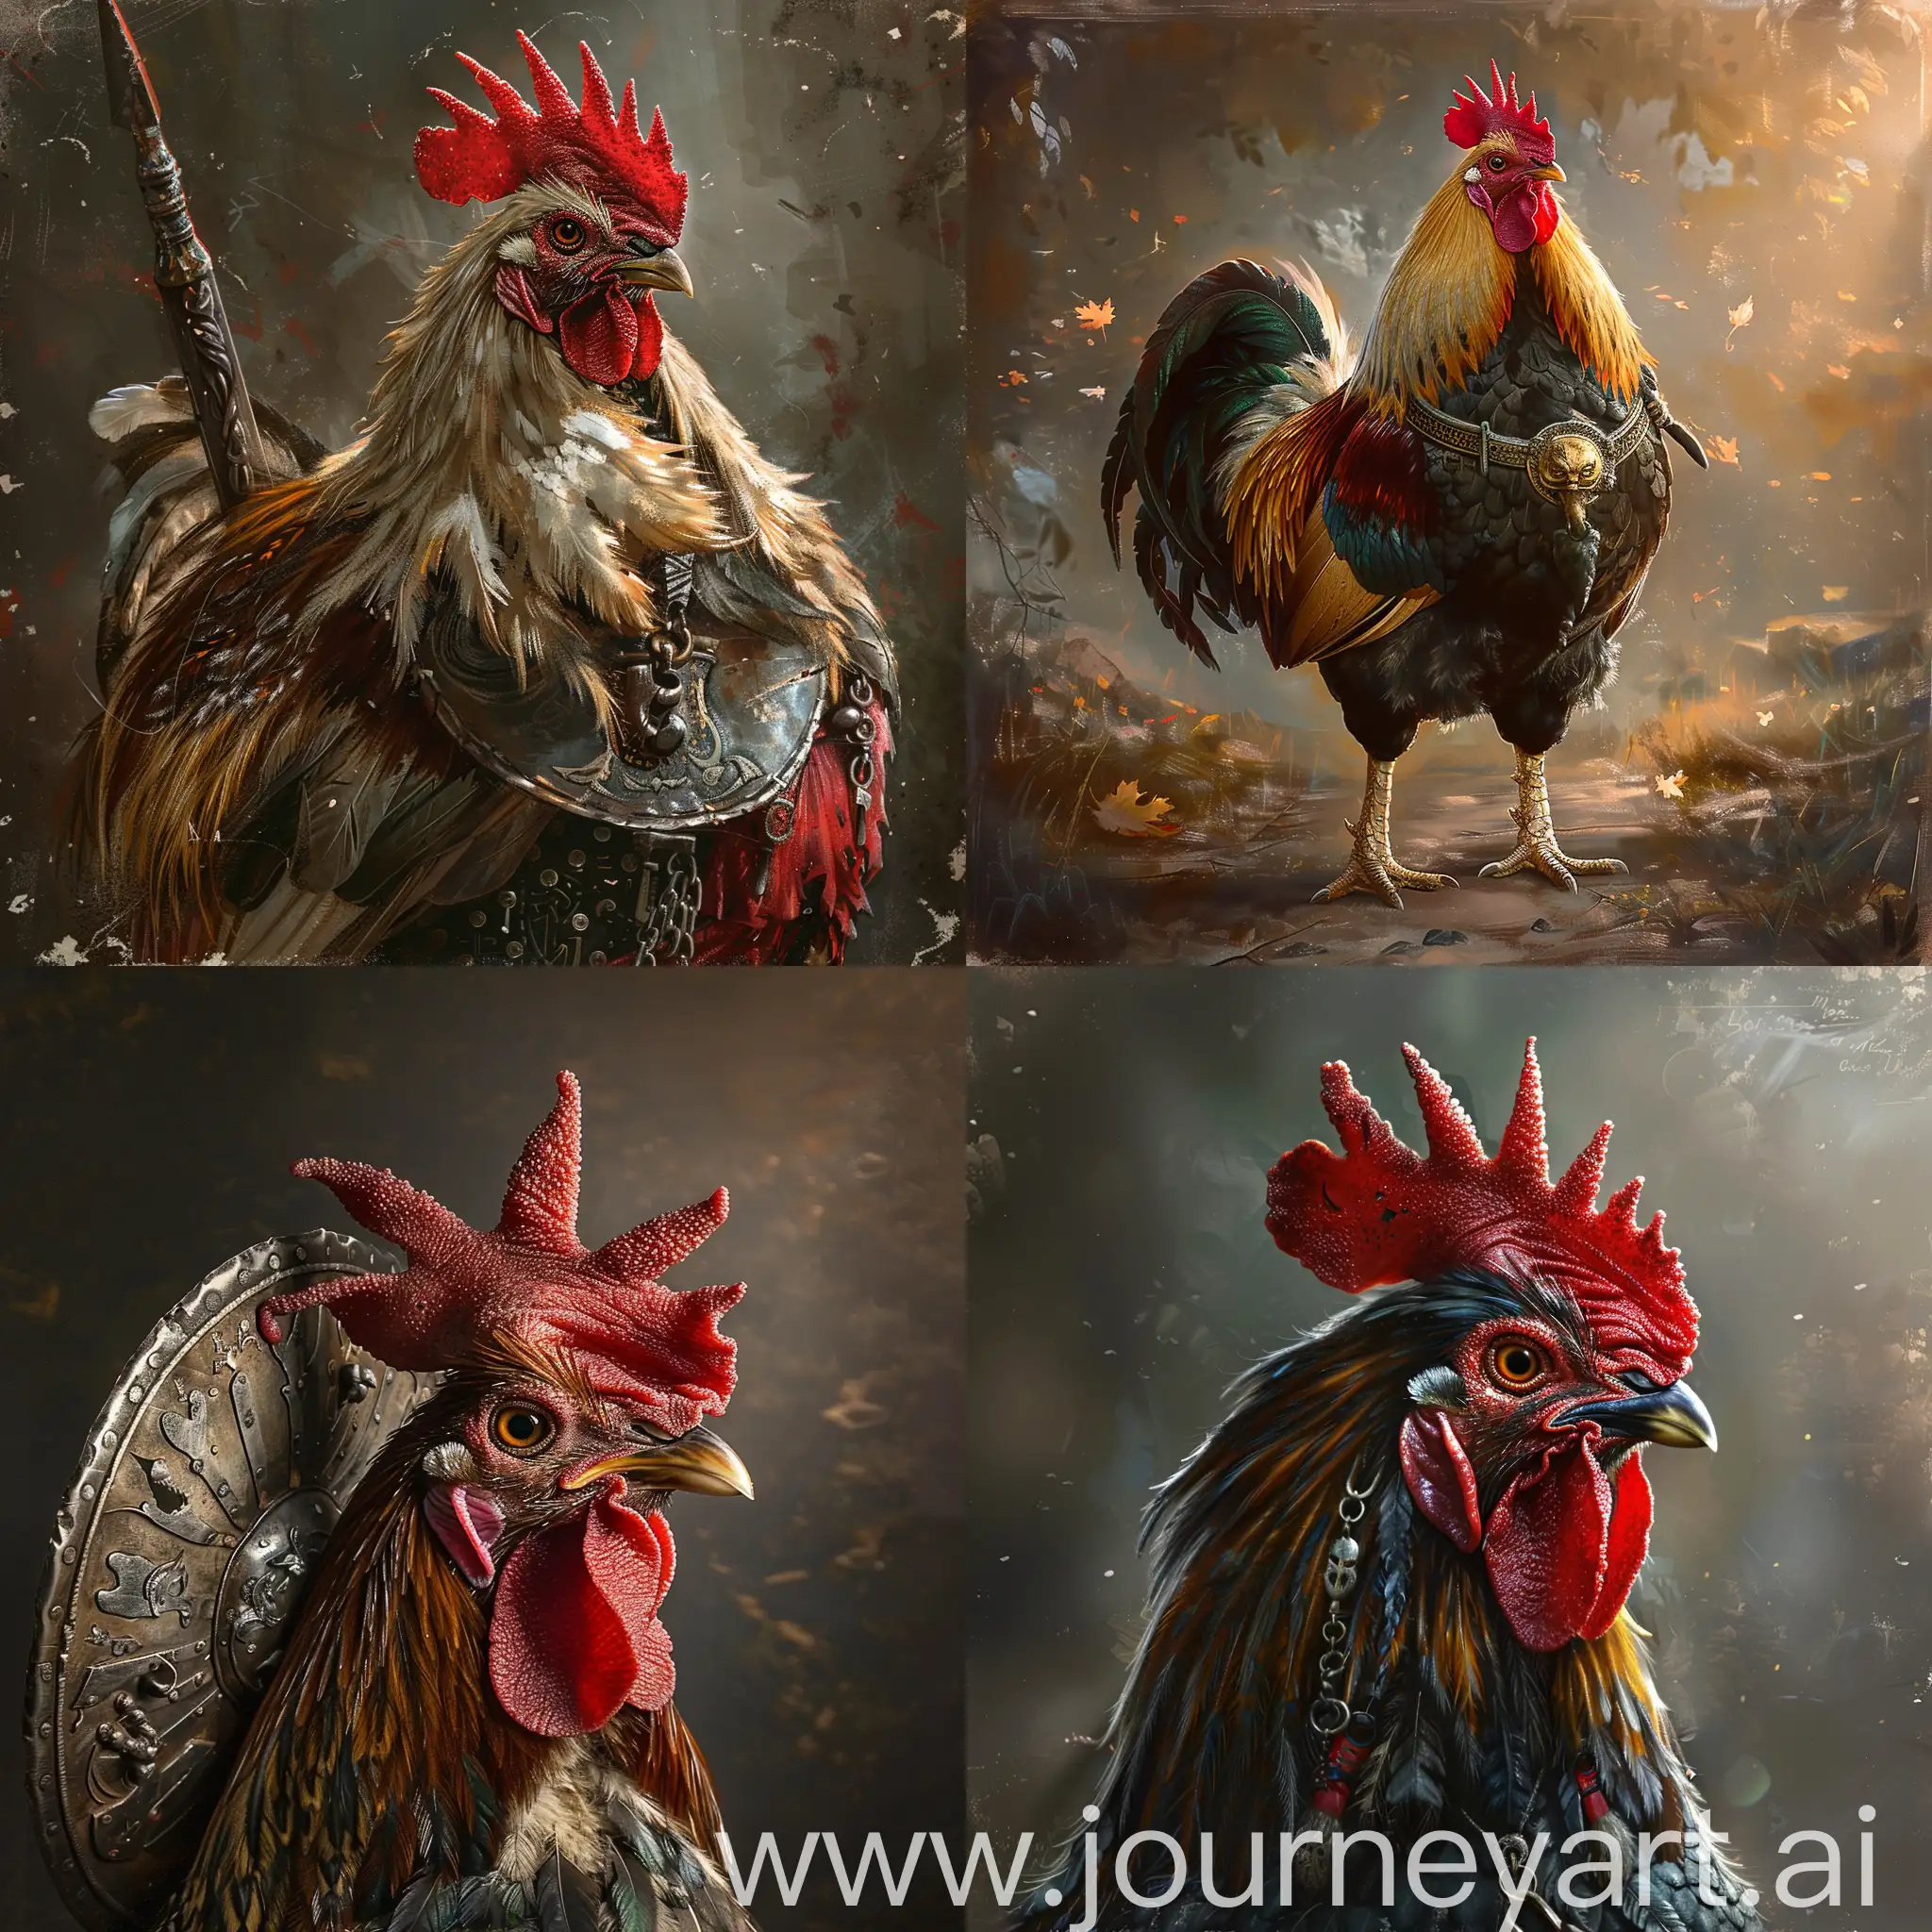 Fierce-Warrior-Rooster-Commander-and-Gladiator-Confrontation